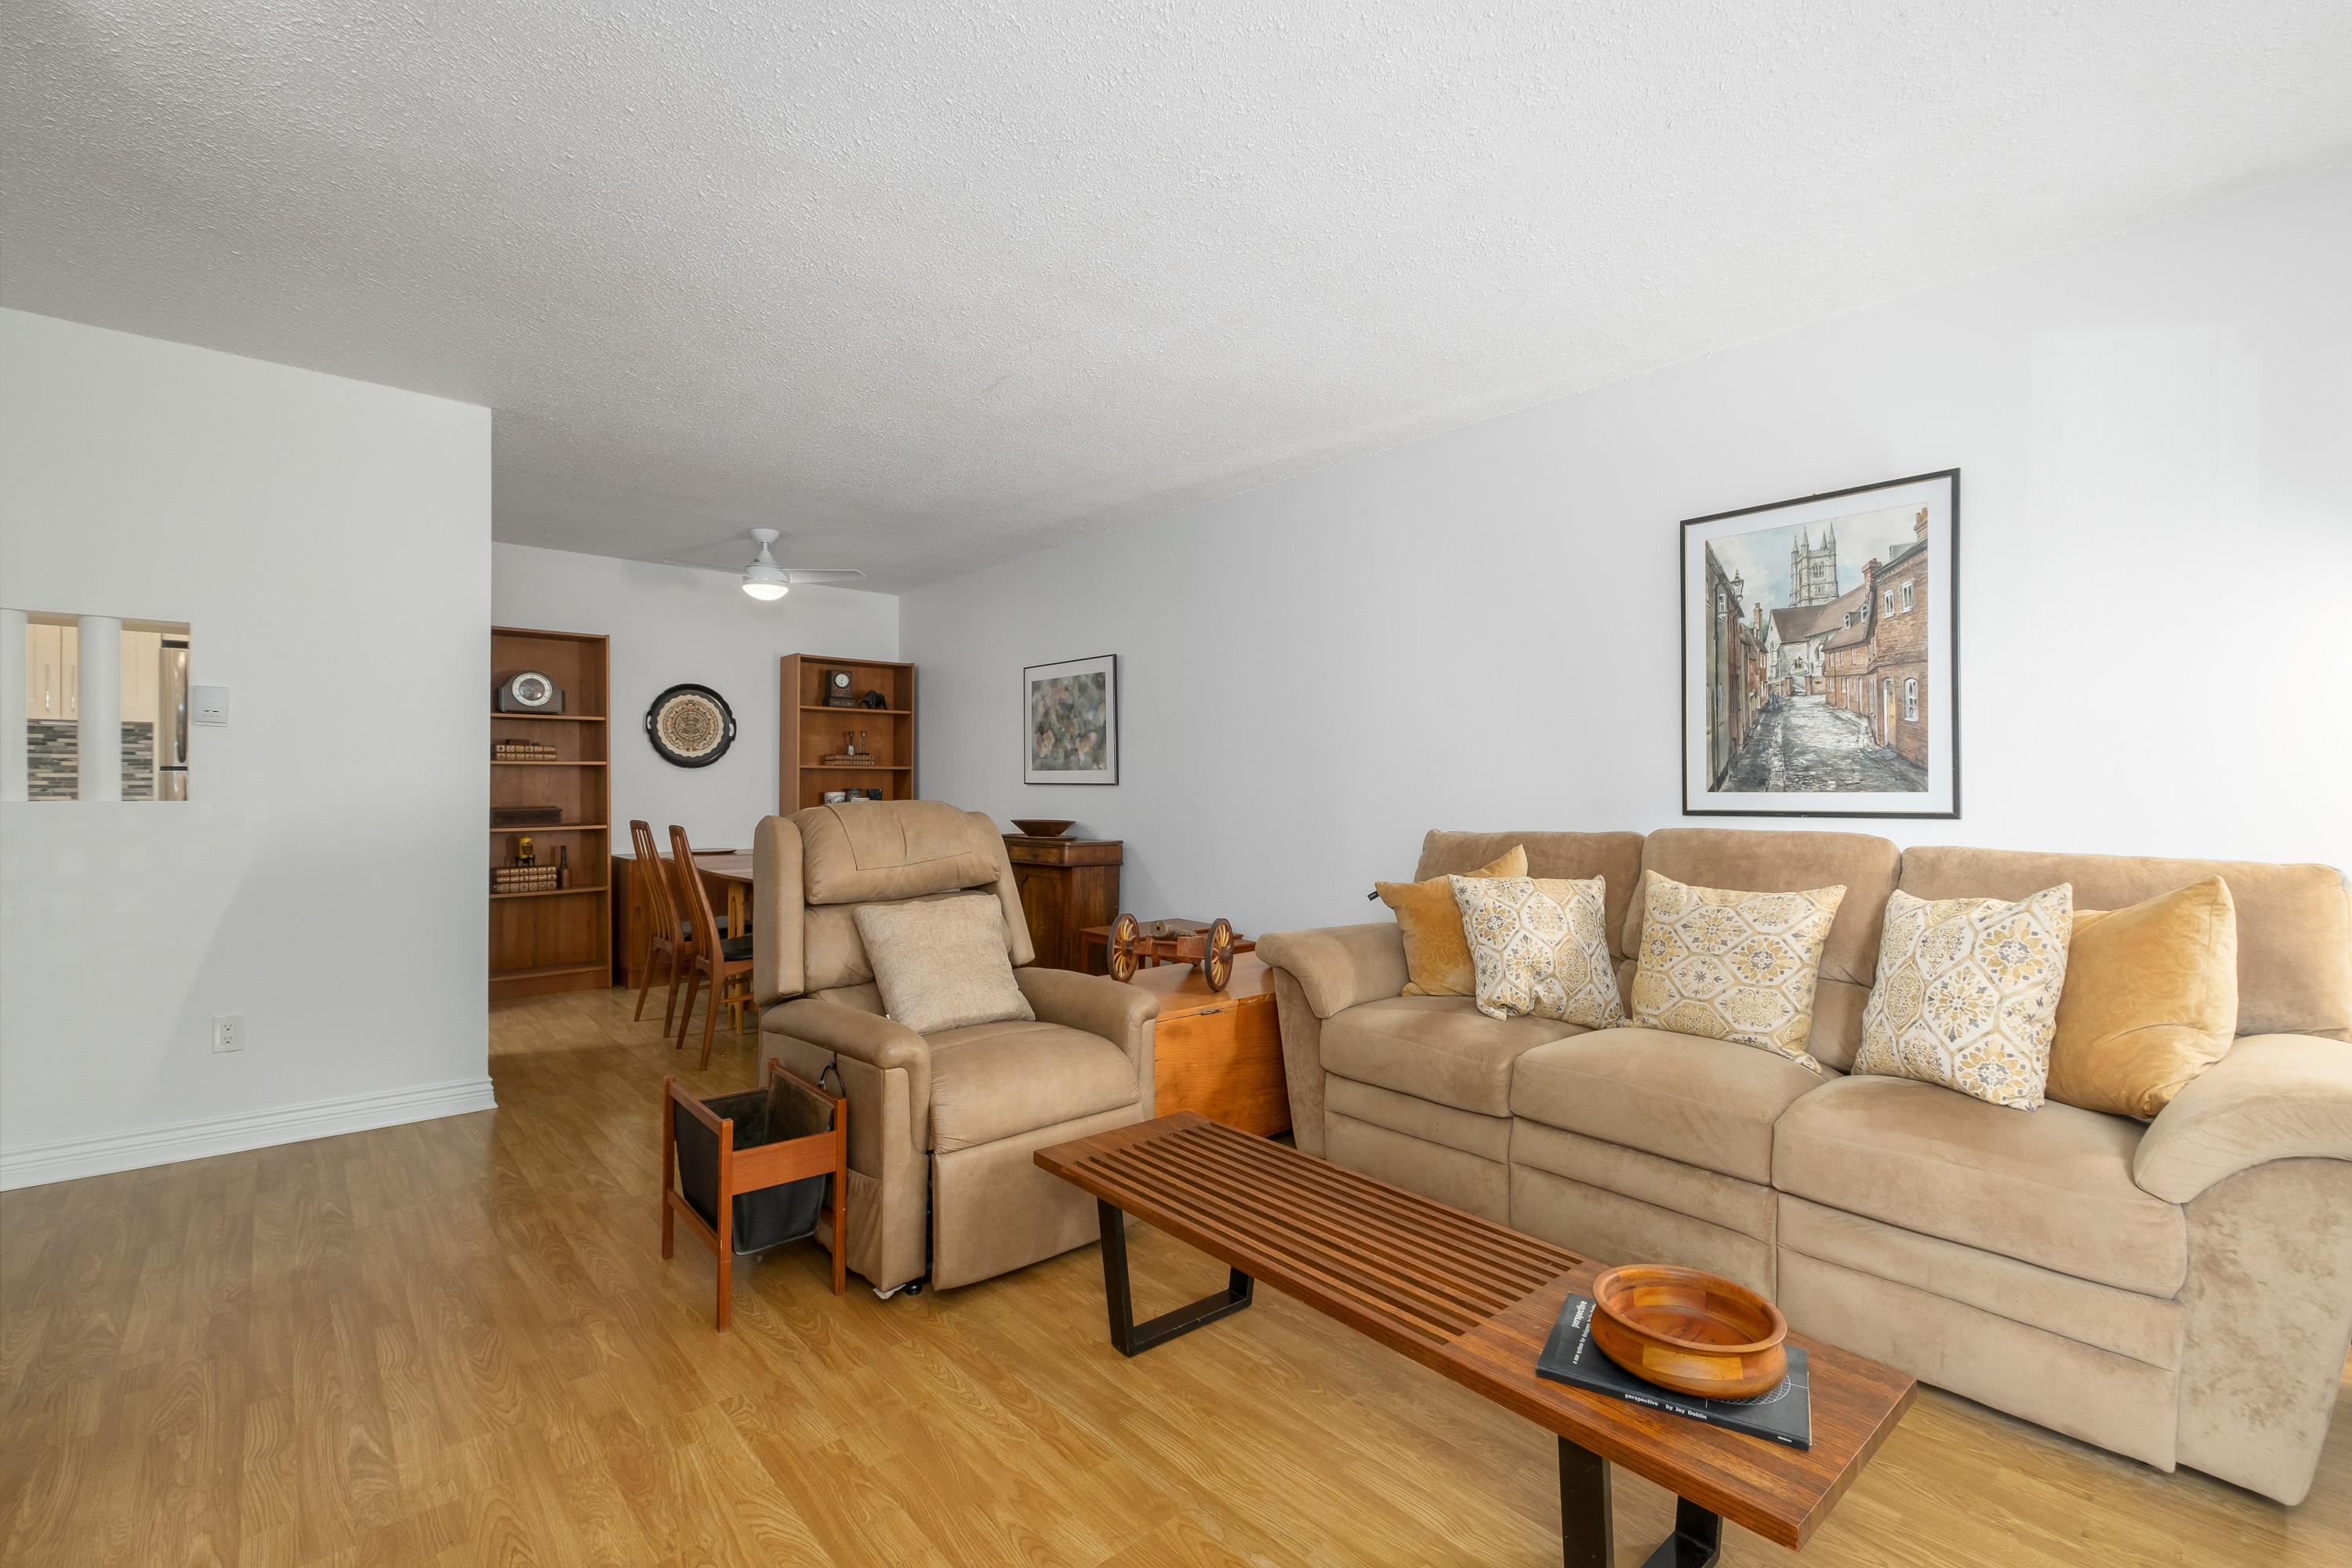 321 204 WESTHILL PLACE, #321